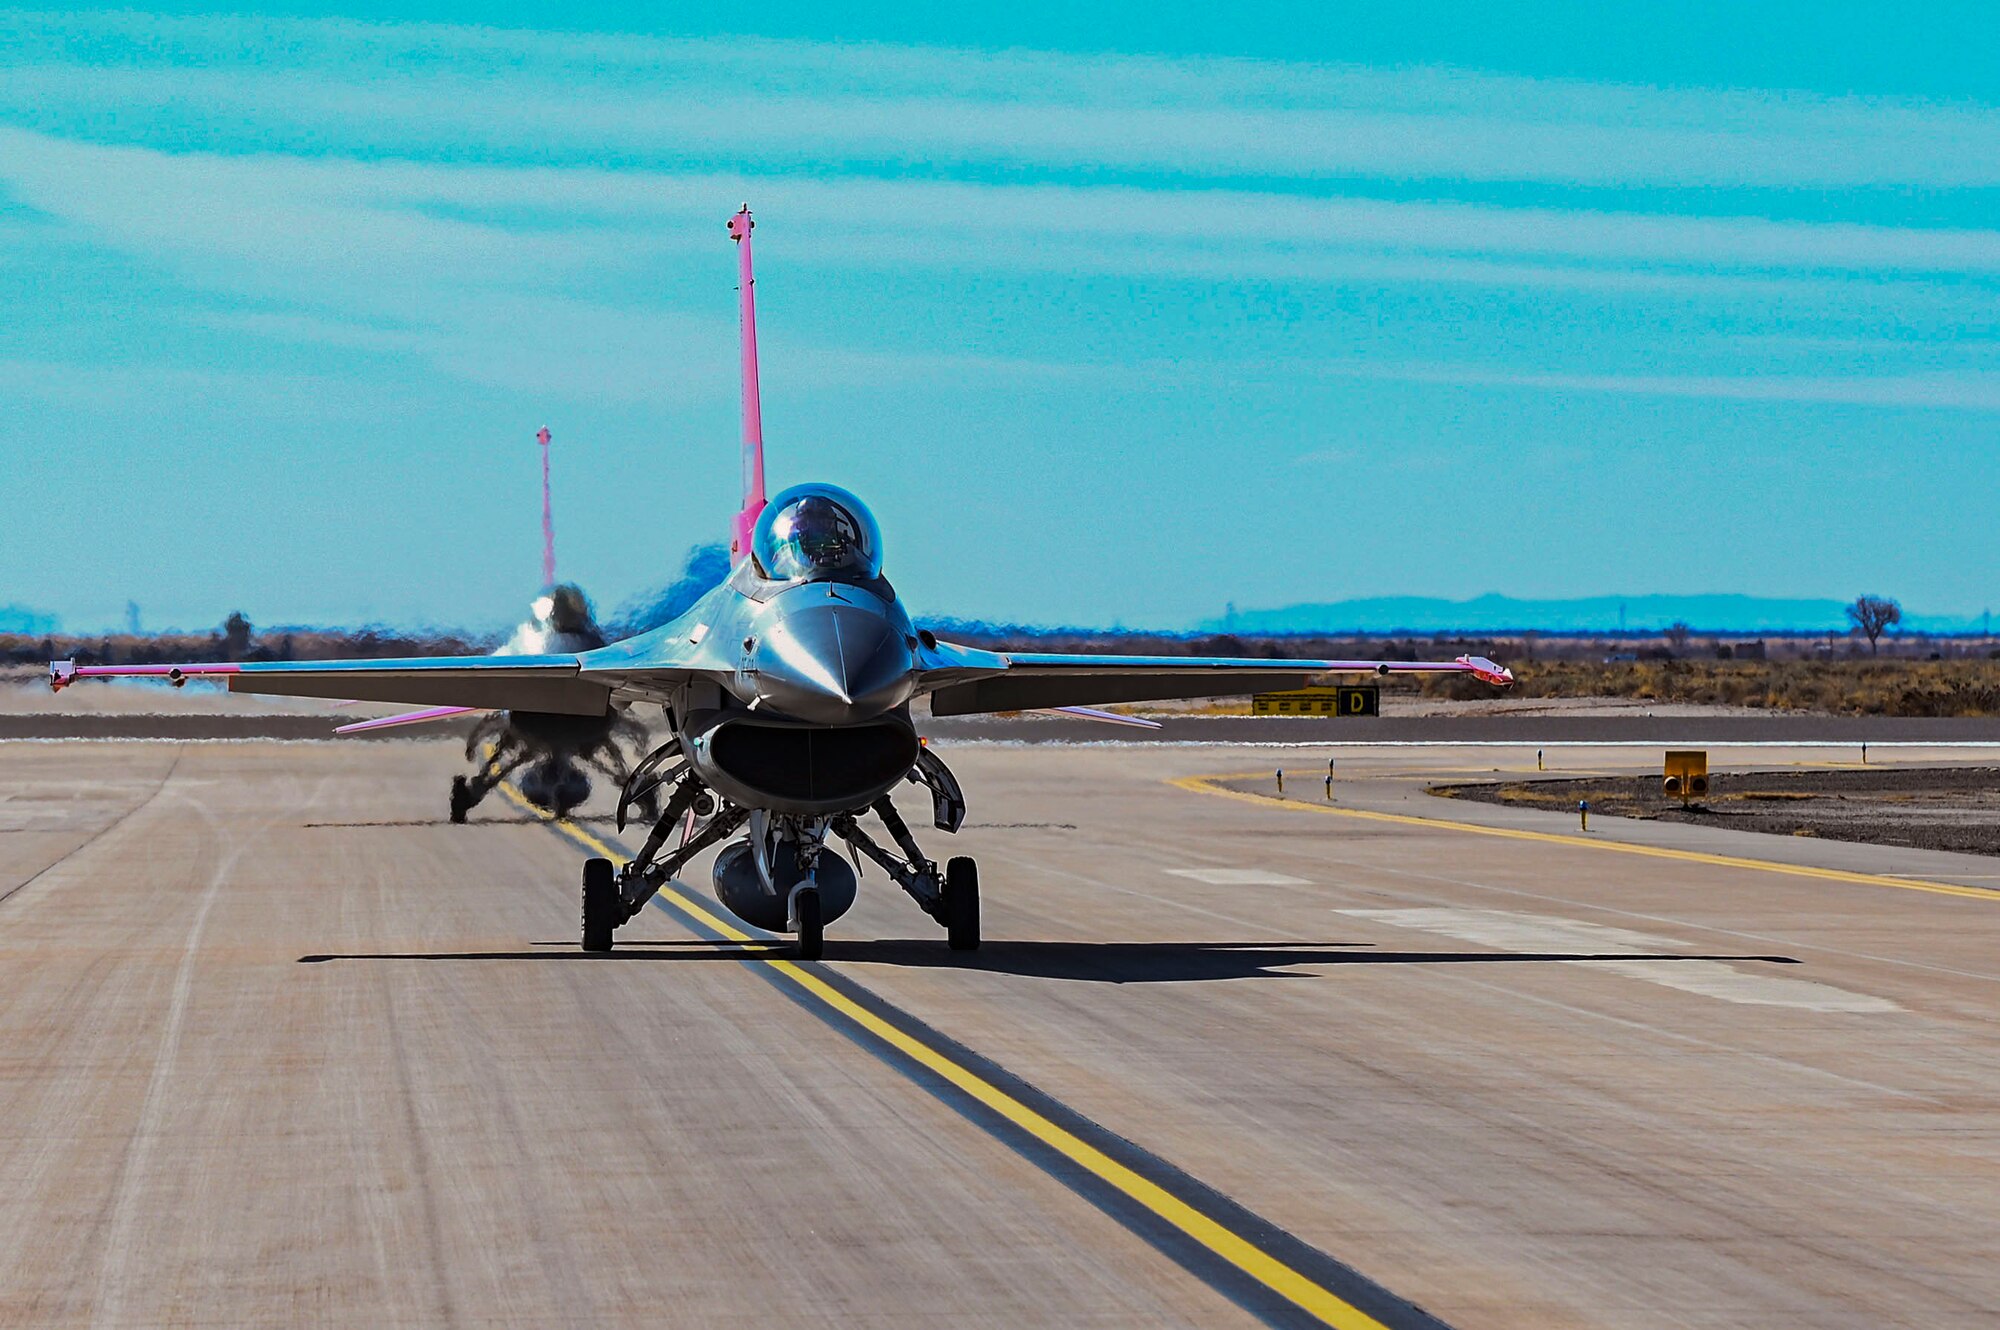 Two QF-16 Vipers from the 82nd Aerial Targets Squadron Detachment 1, taxi on the flightline at Holloman Air Force Base, New Mexico, Feb. 22, 2023.The 82nd ATRS is responsible for providing QF-16s for customers’ system tests that require aerial targets for weapons testing. (U.S. Air Force photo by Airman 1st Class Isaiah Pedrazzini)